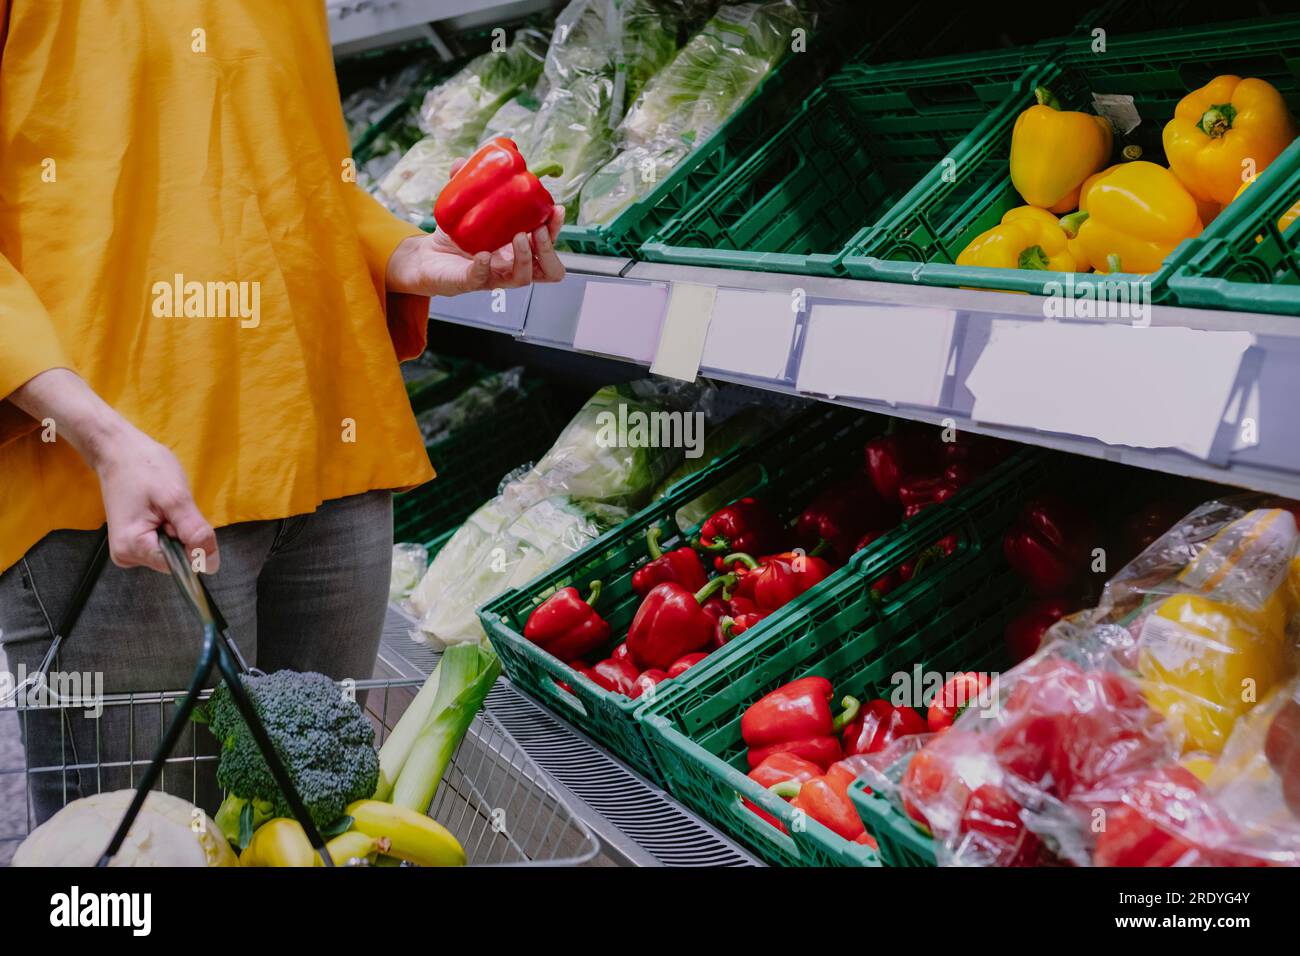 Woman buying red bell pepper at supermarket Stock Photo